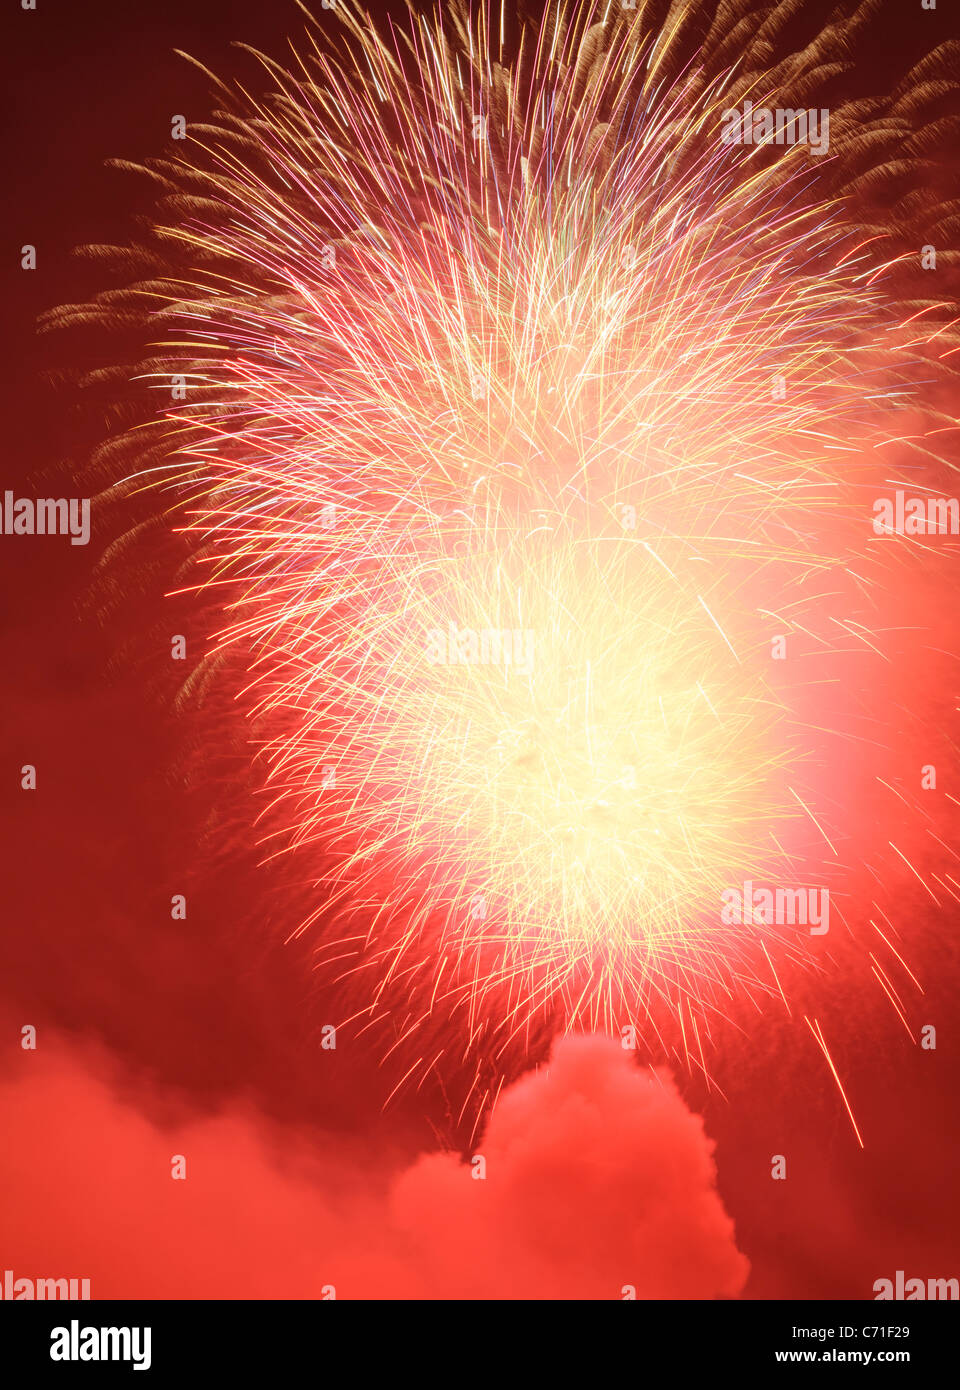 Red fireworks. Stock Photo